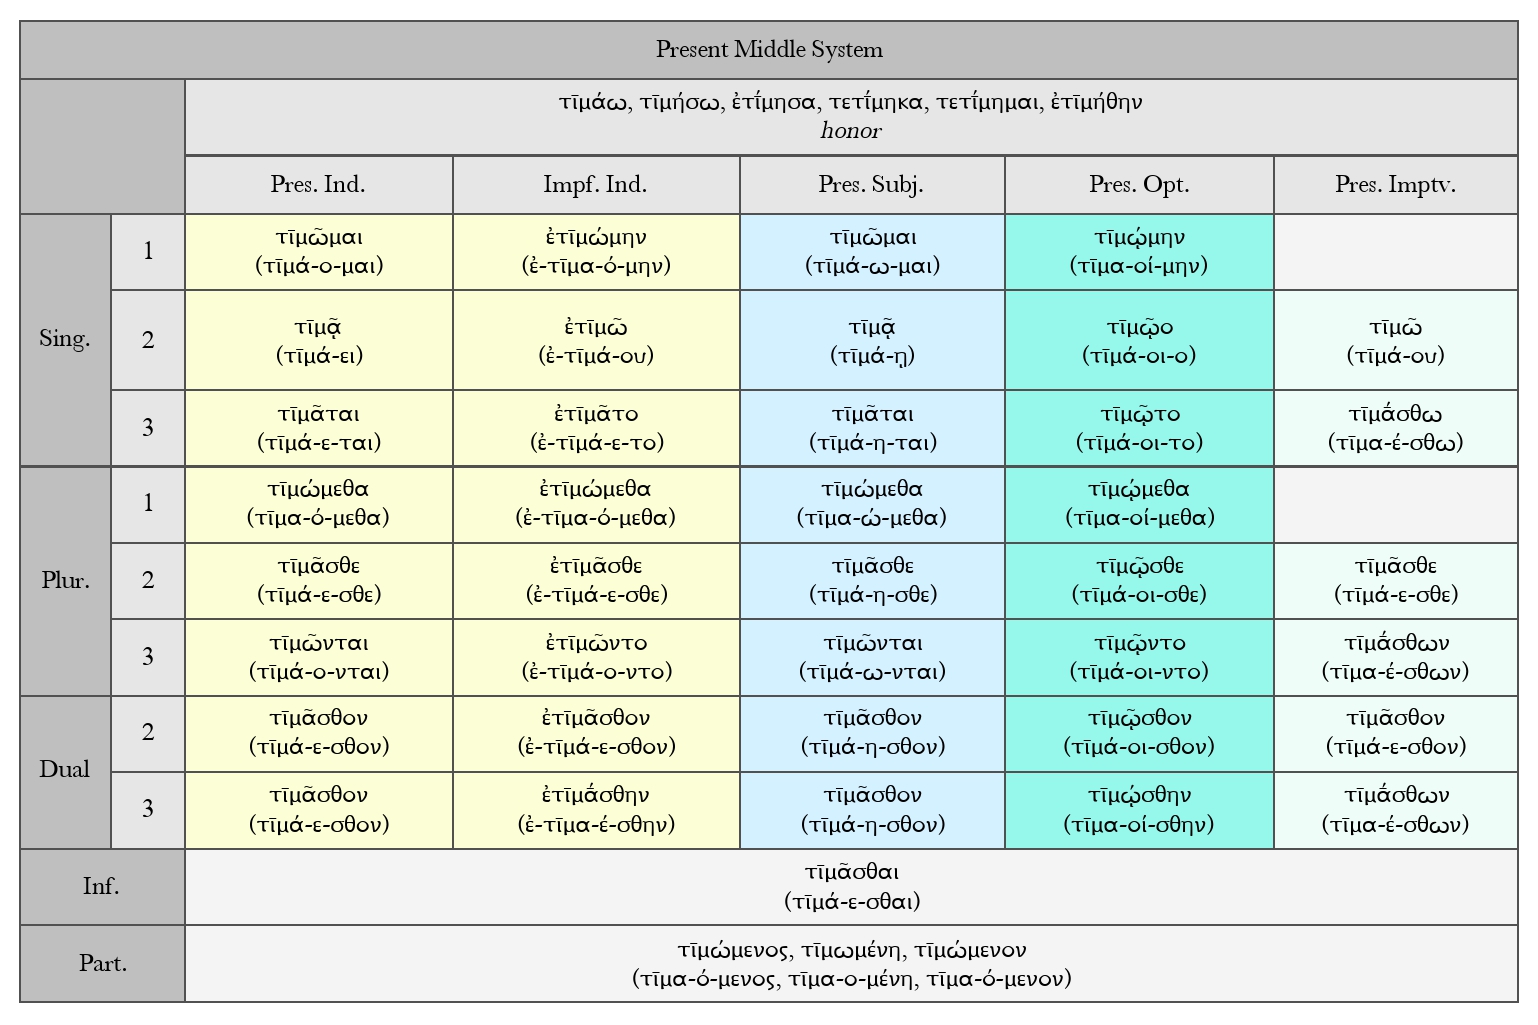 Goodell: Present Middle System Paradigm Chart for τῑμάω